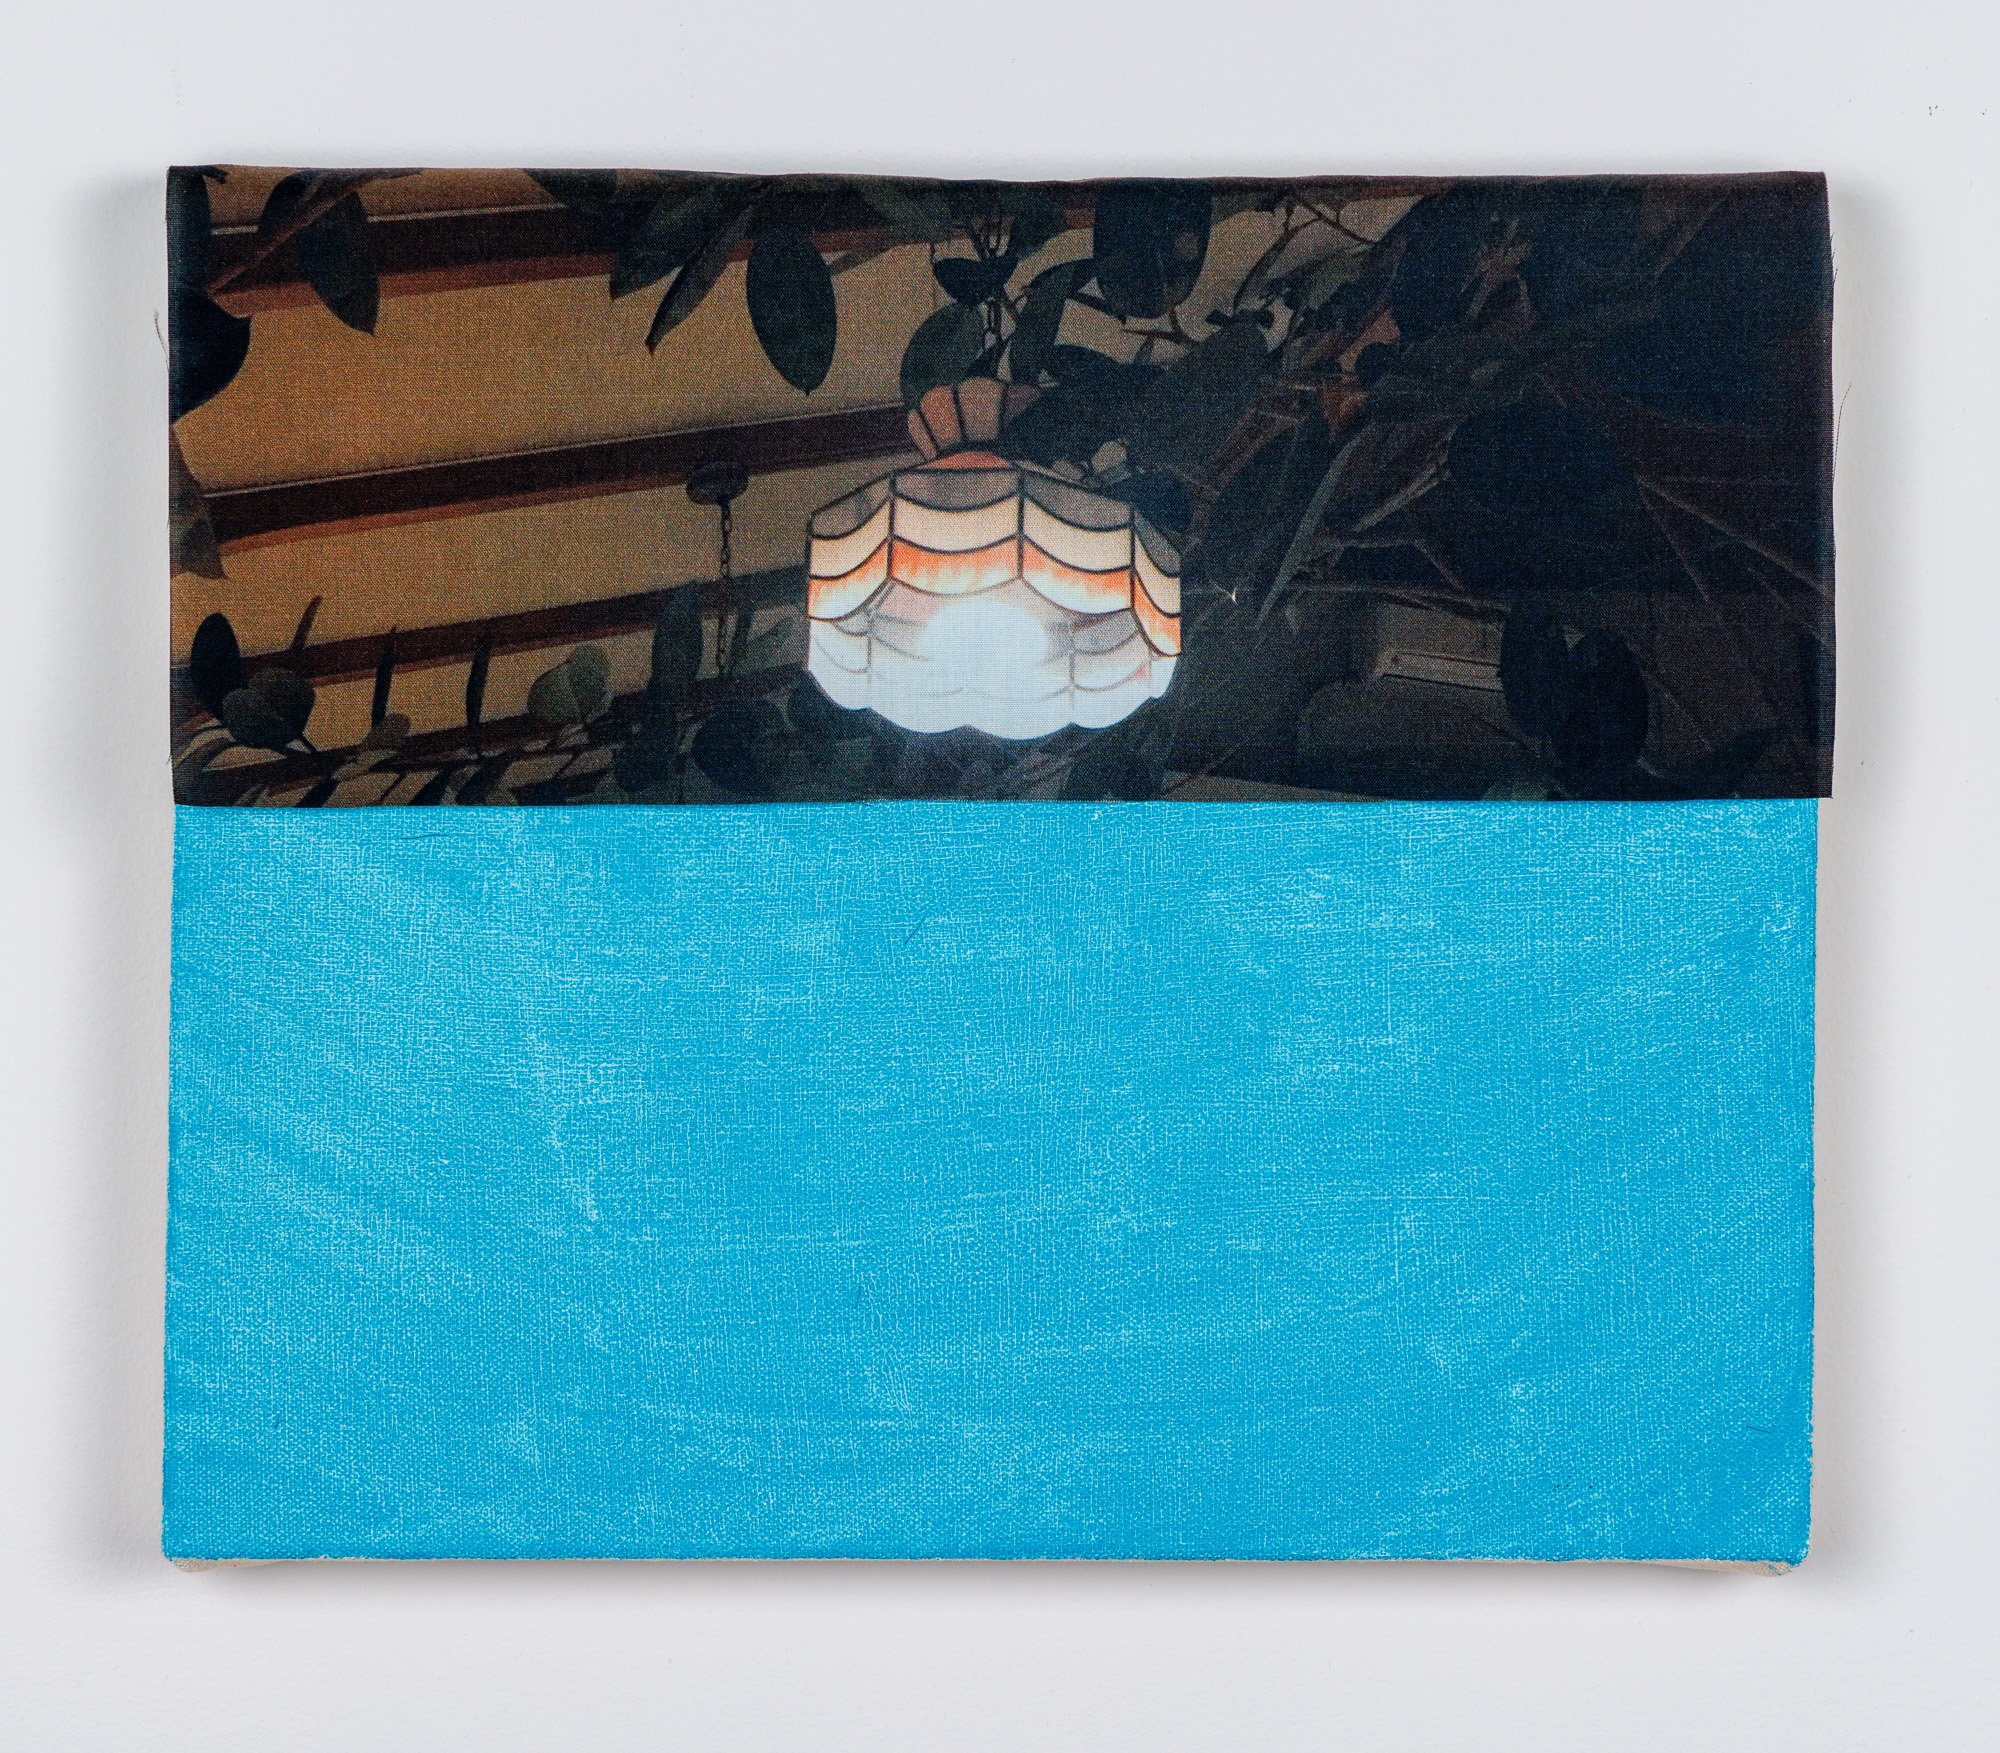  Laura Hunt,  Restaurant Lamp , 2019, watercolor and printed cotton on canvas, 10 x 12 inches. 